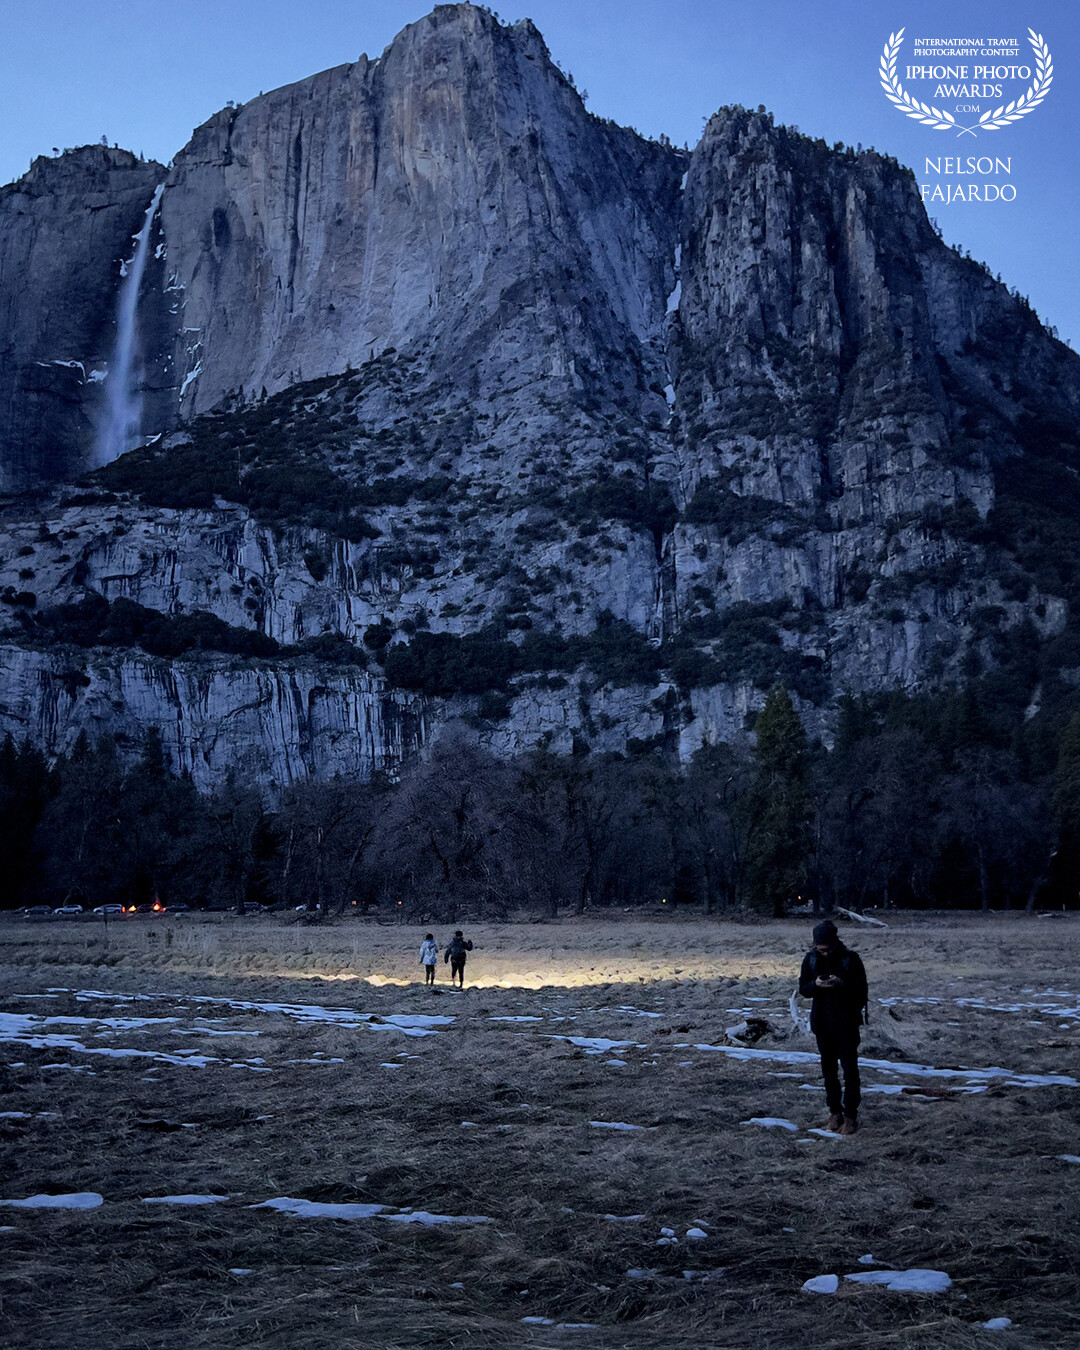 Early evening walk at the trail at the valley and the Yosemite waterfall and kids with flashlights looking for frogs.